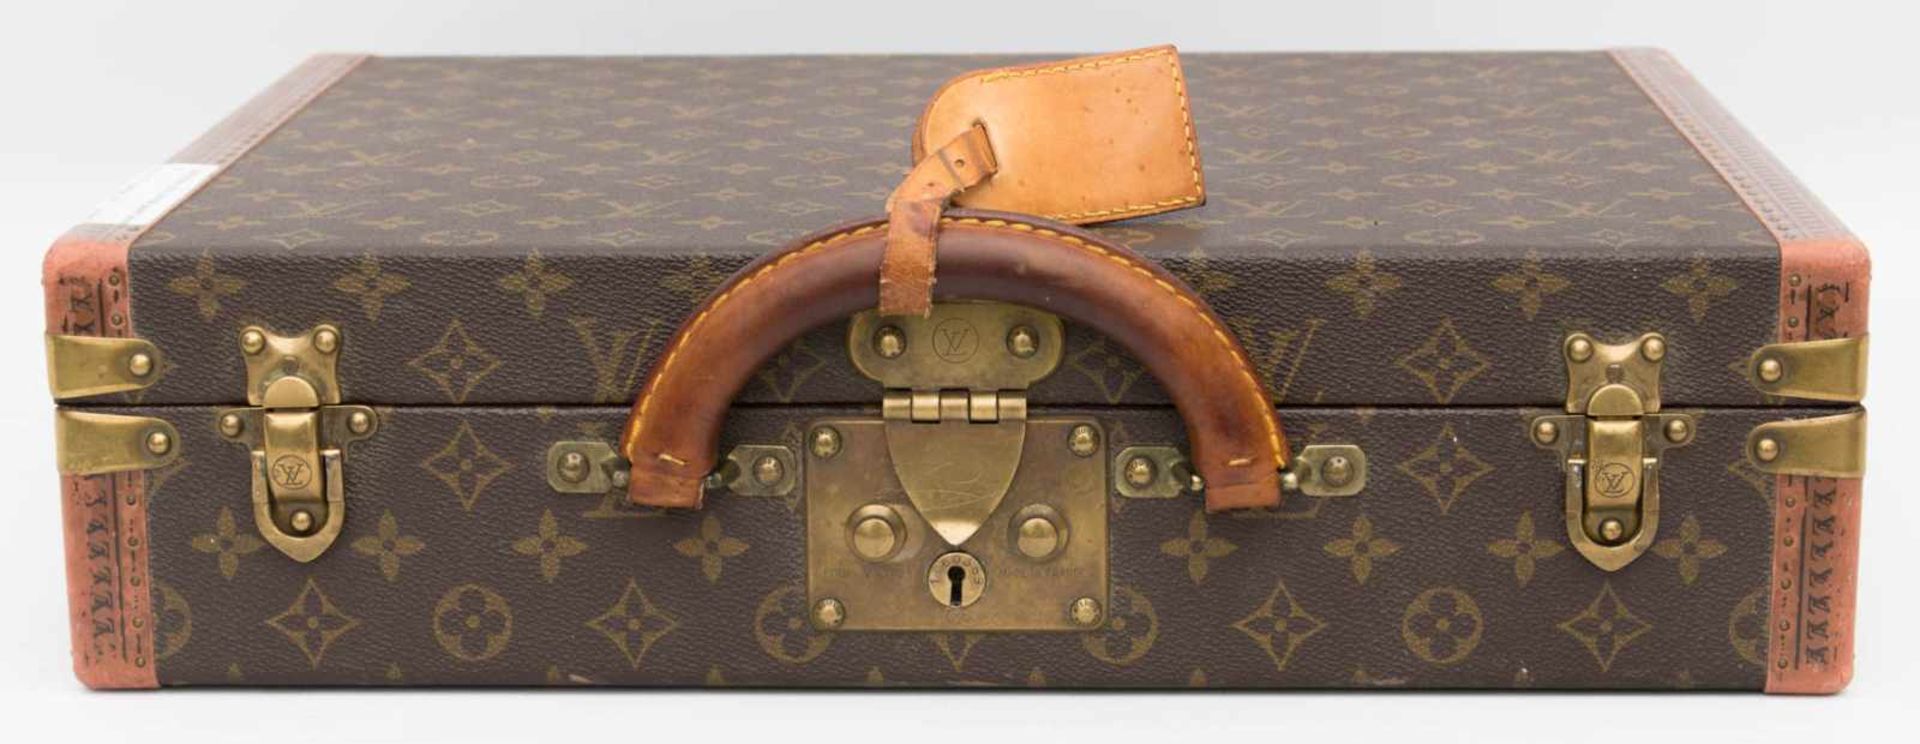 KOFFER LOUIS VUITTON, Modell Cotteville 55. - Image 3 of 4